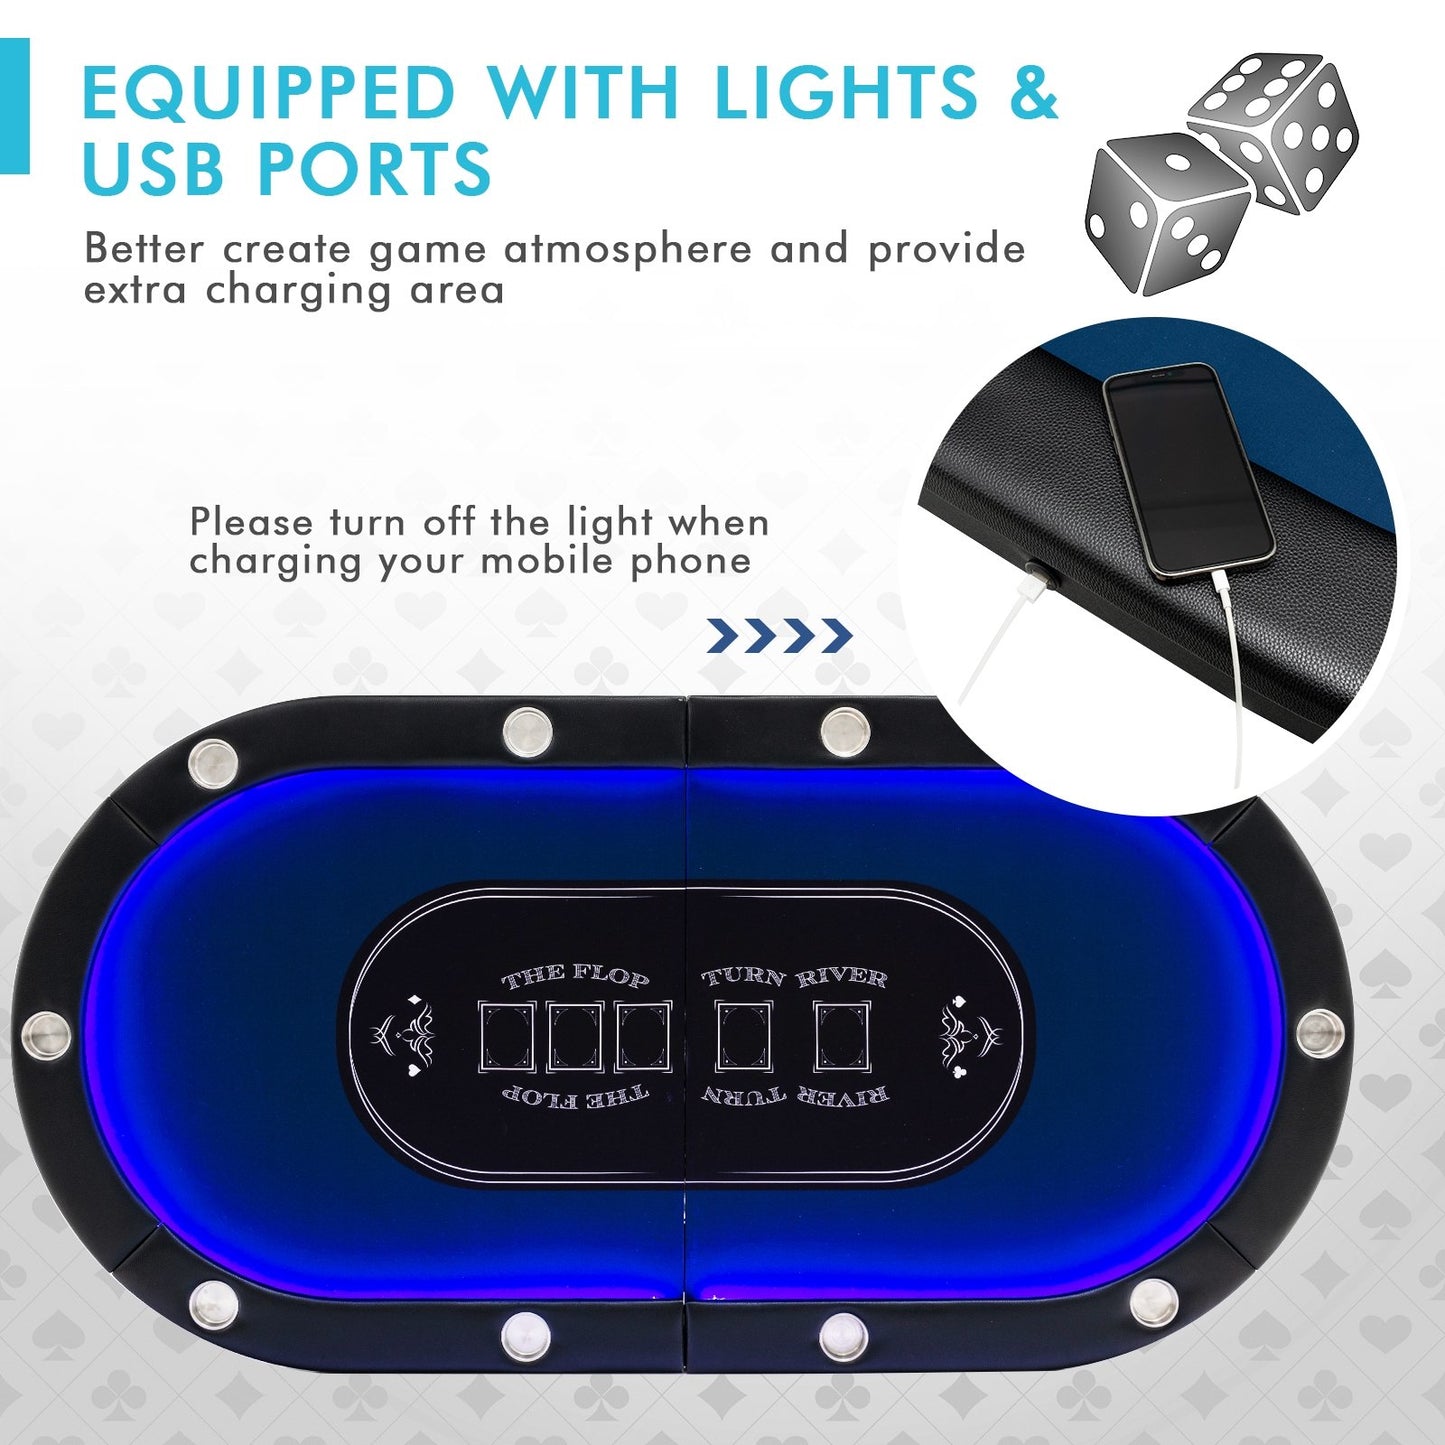 Foldable 10-Player Poker Table with LED Lights and USB Ports Ideal for Texas Casino, Blue